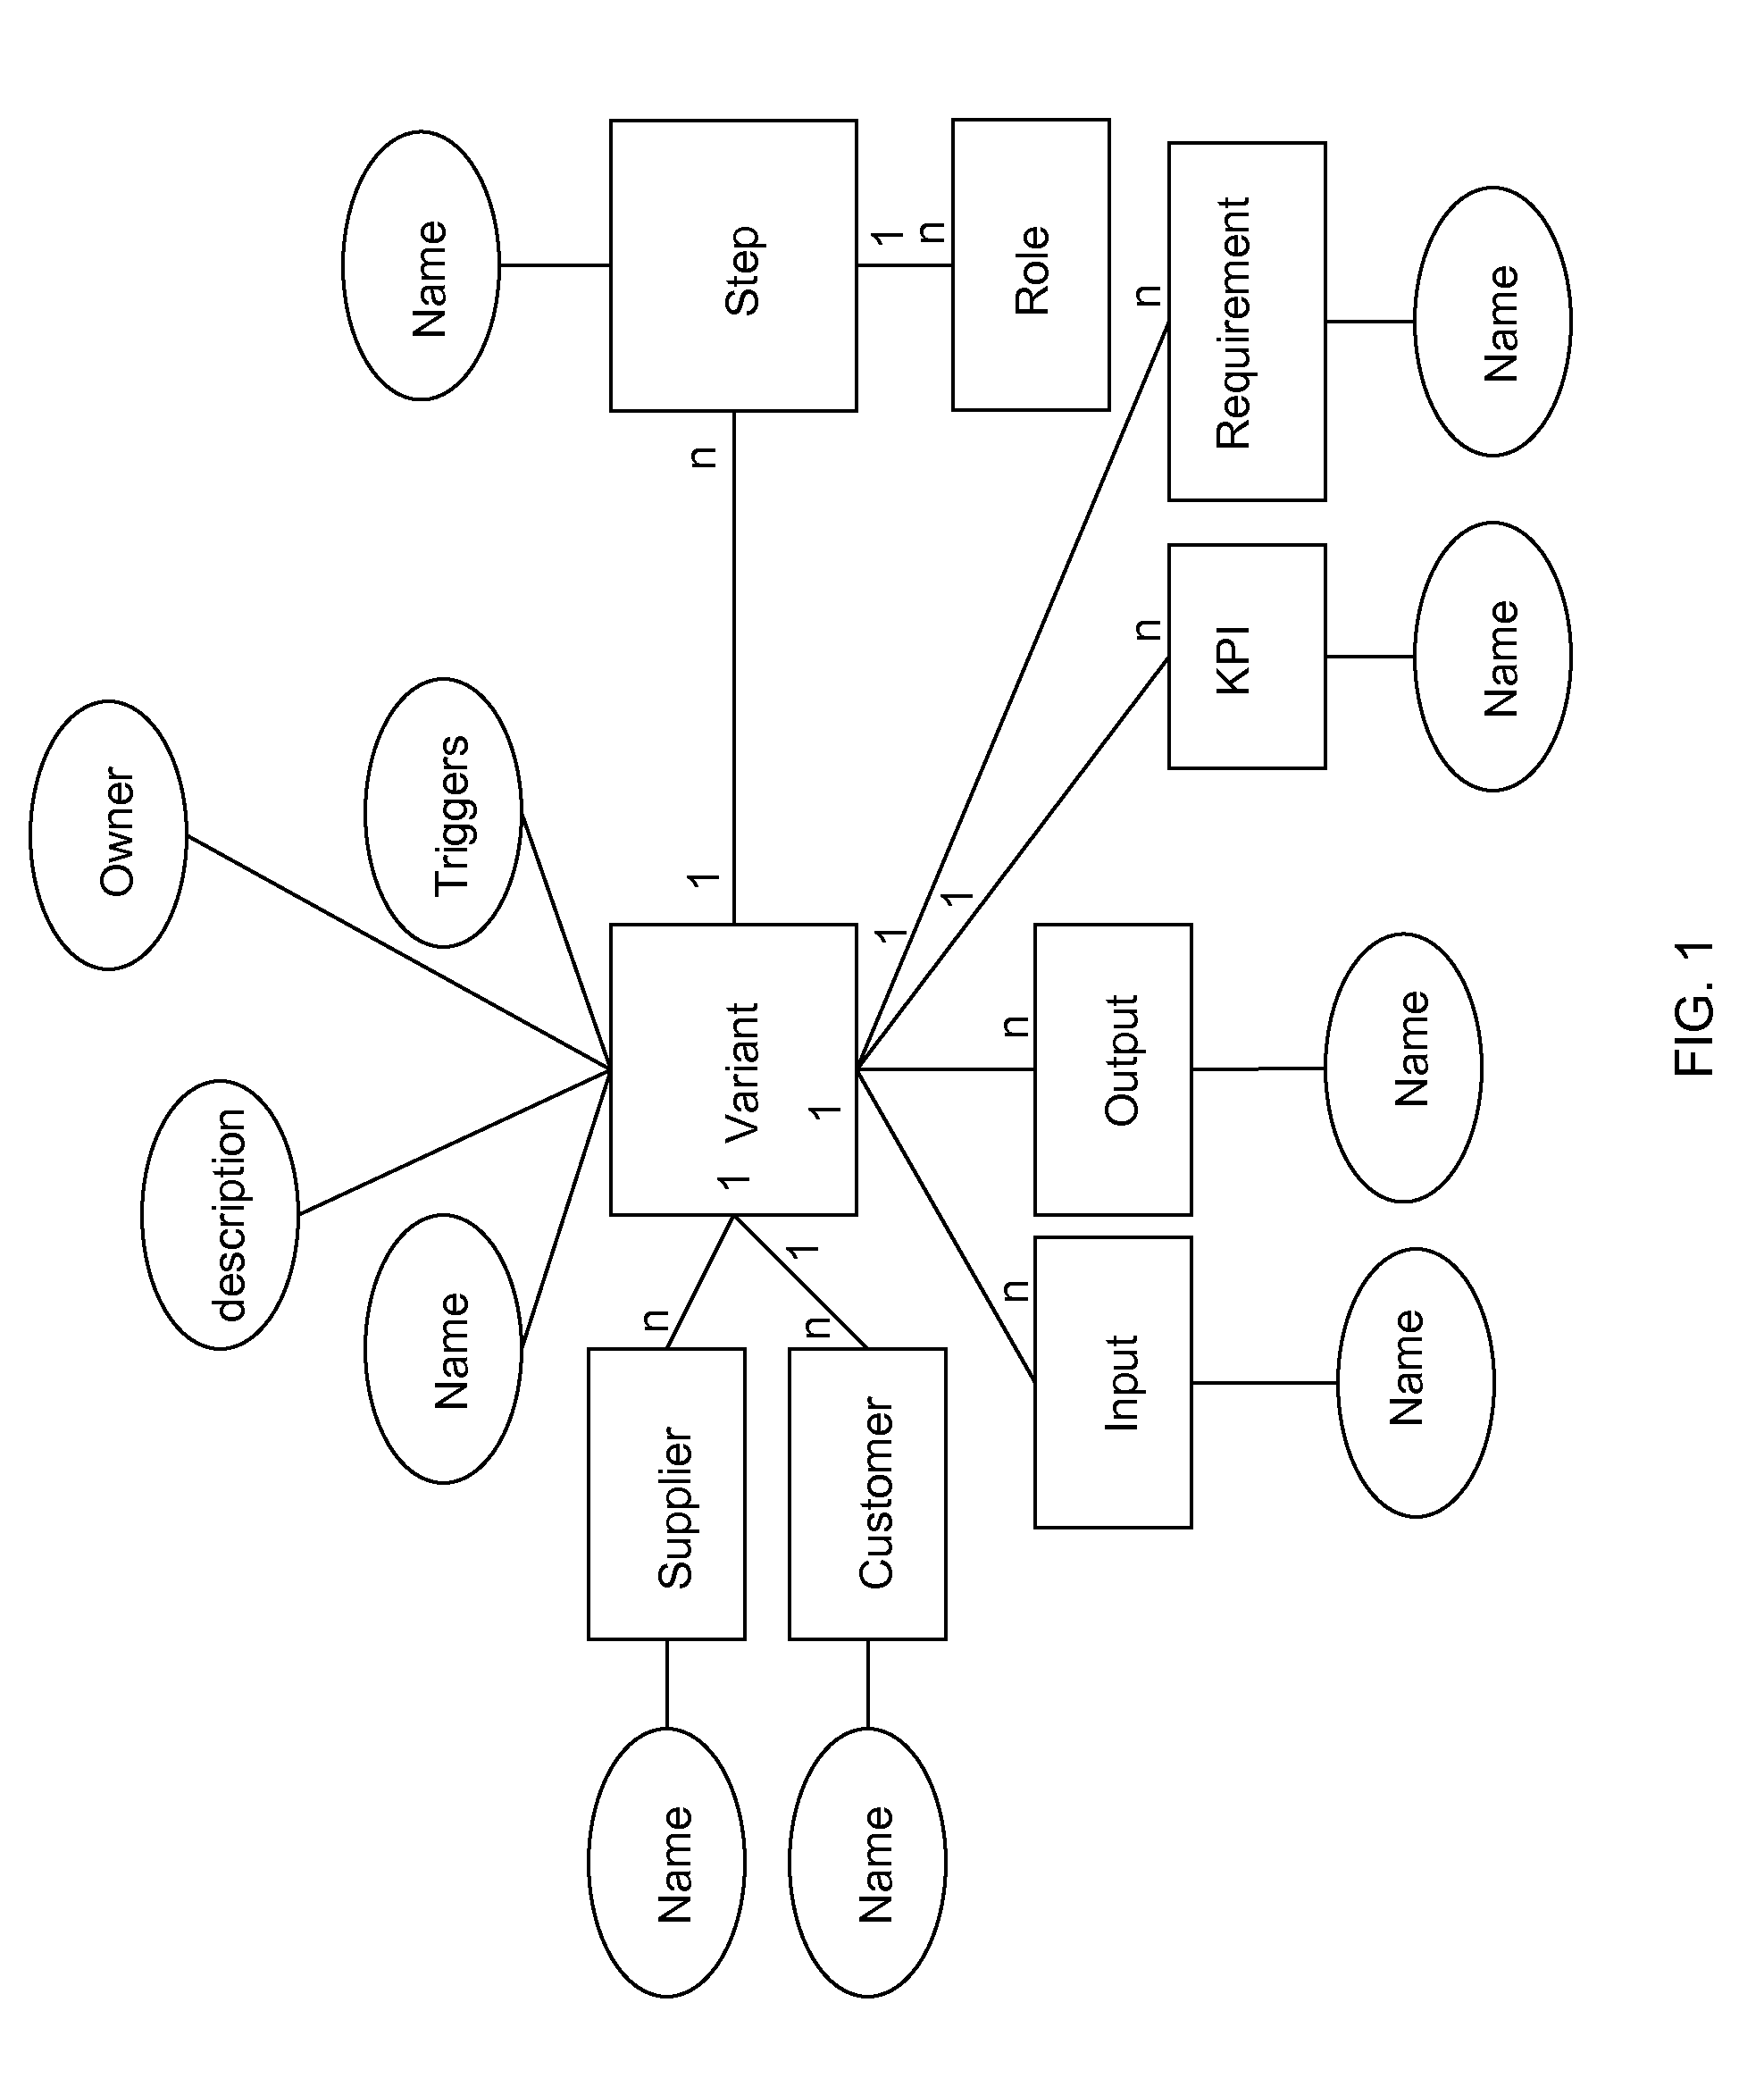 System and method to extract models from semi-structured documents